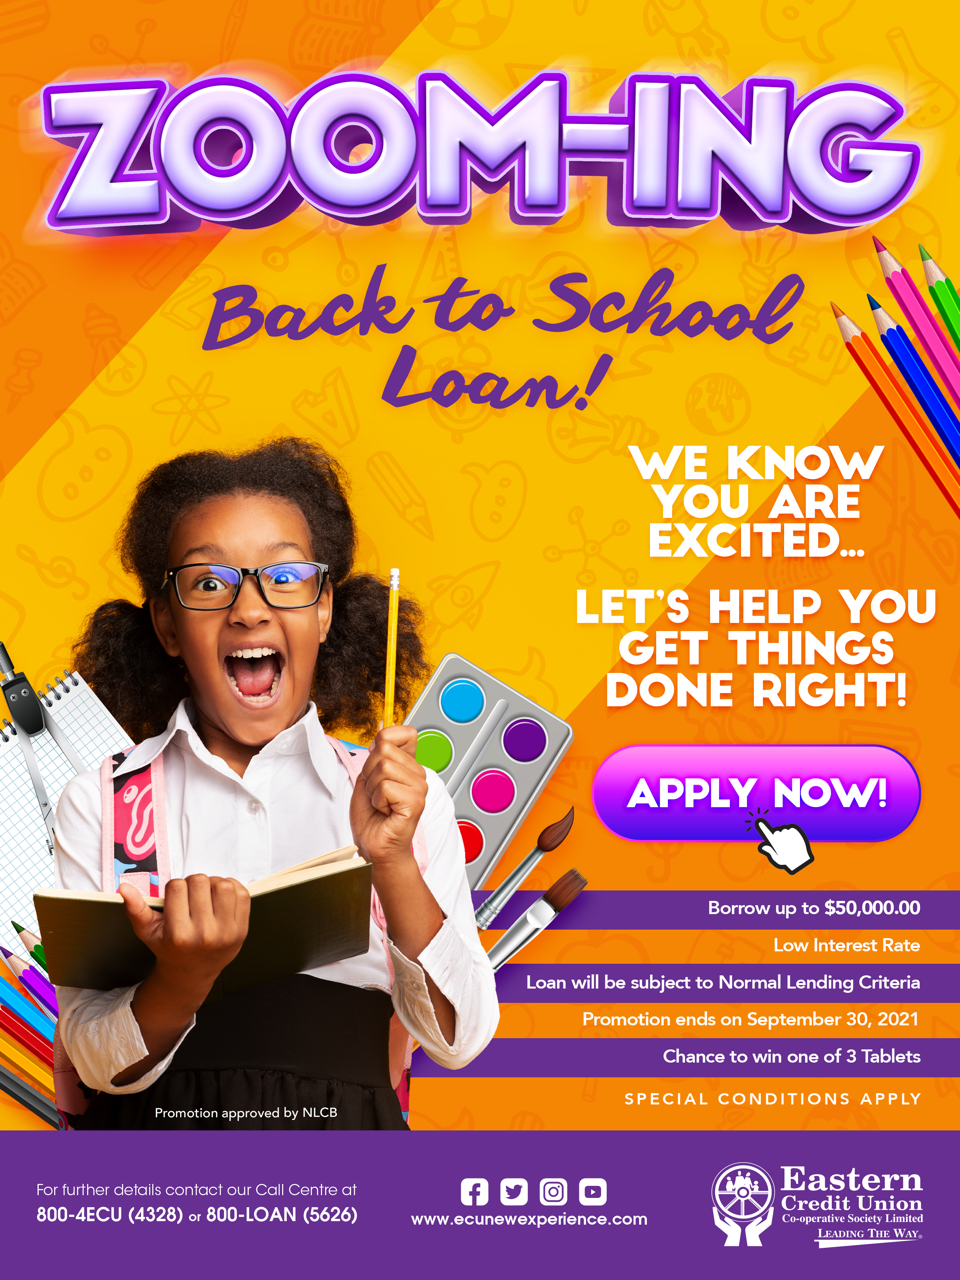  Zooming Back to School Loan Promotion